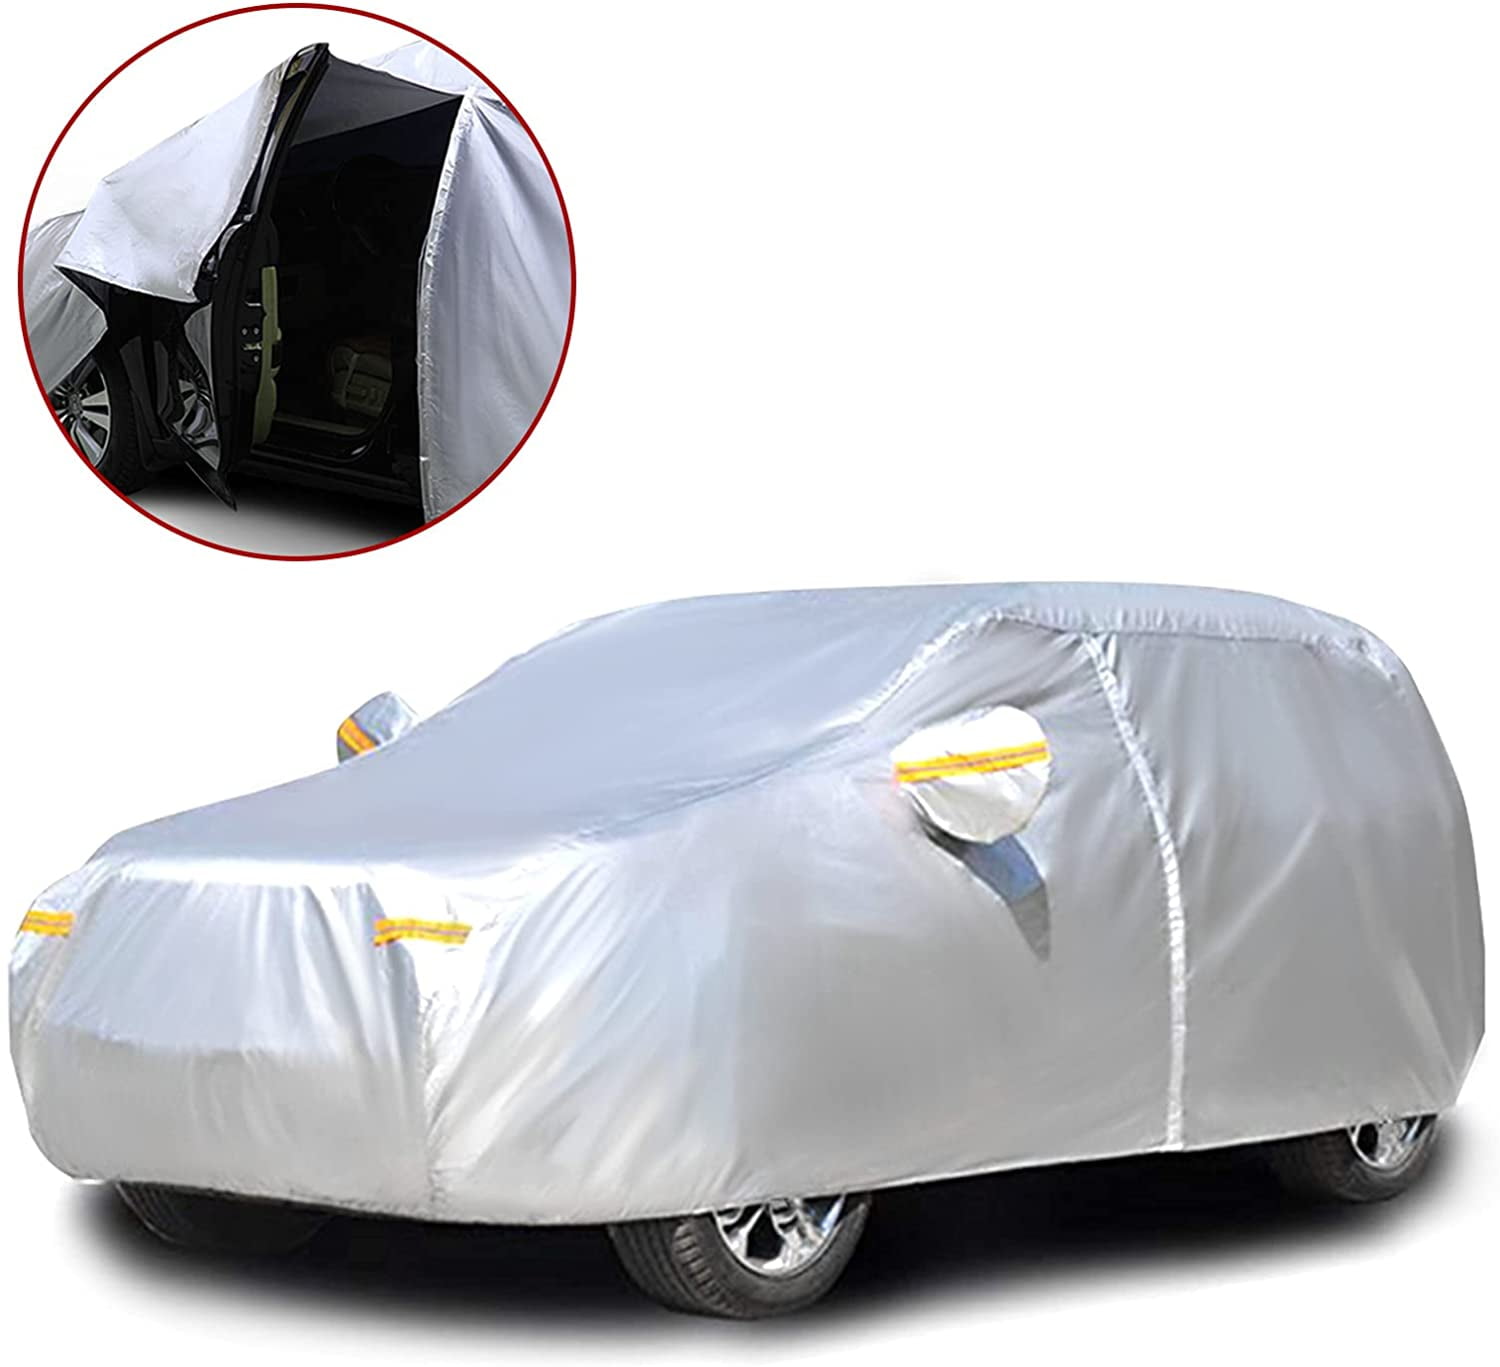 NEVERLAND SUV Cover 5 Layers,All Weather Waterproof Car Cover with Soft Cotton,Outdoor/Indoor Full Cover,Sun Rain Snow Dust Protection & PEVA Heavy-Duty Waterproof Coating,Fit SUV Length up to179